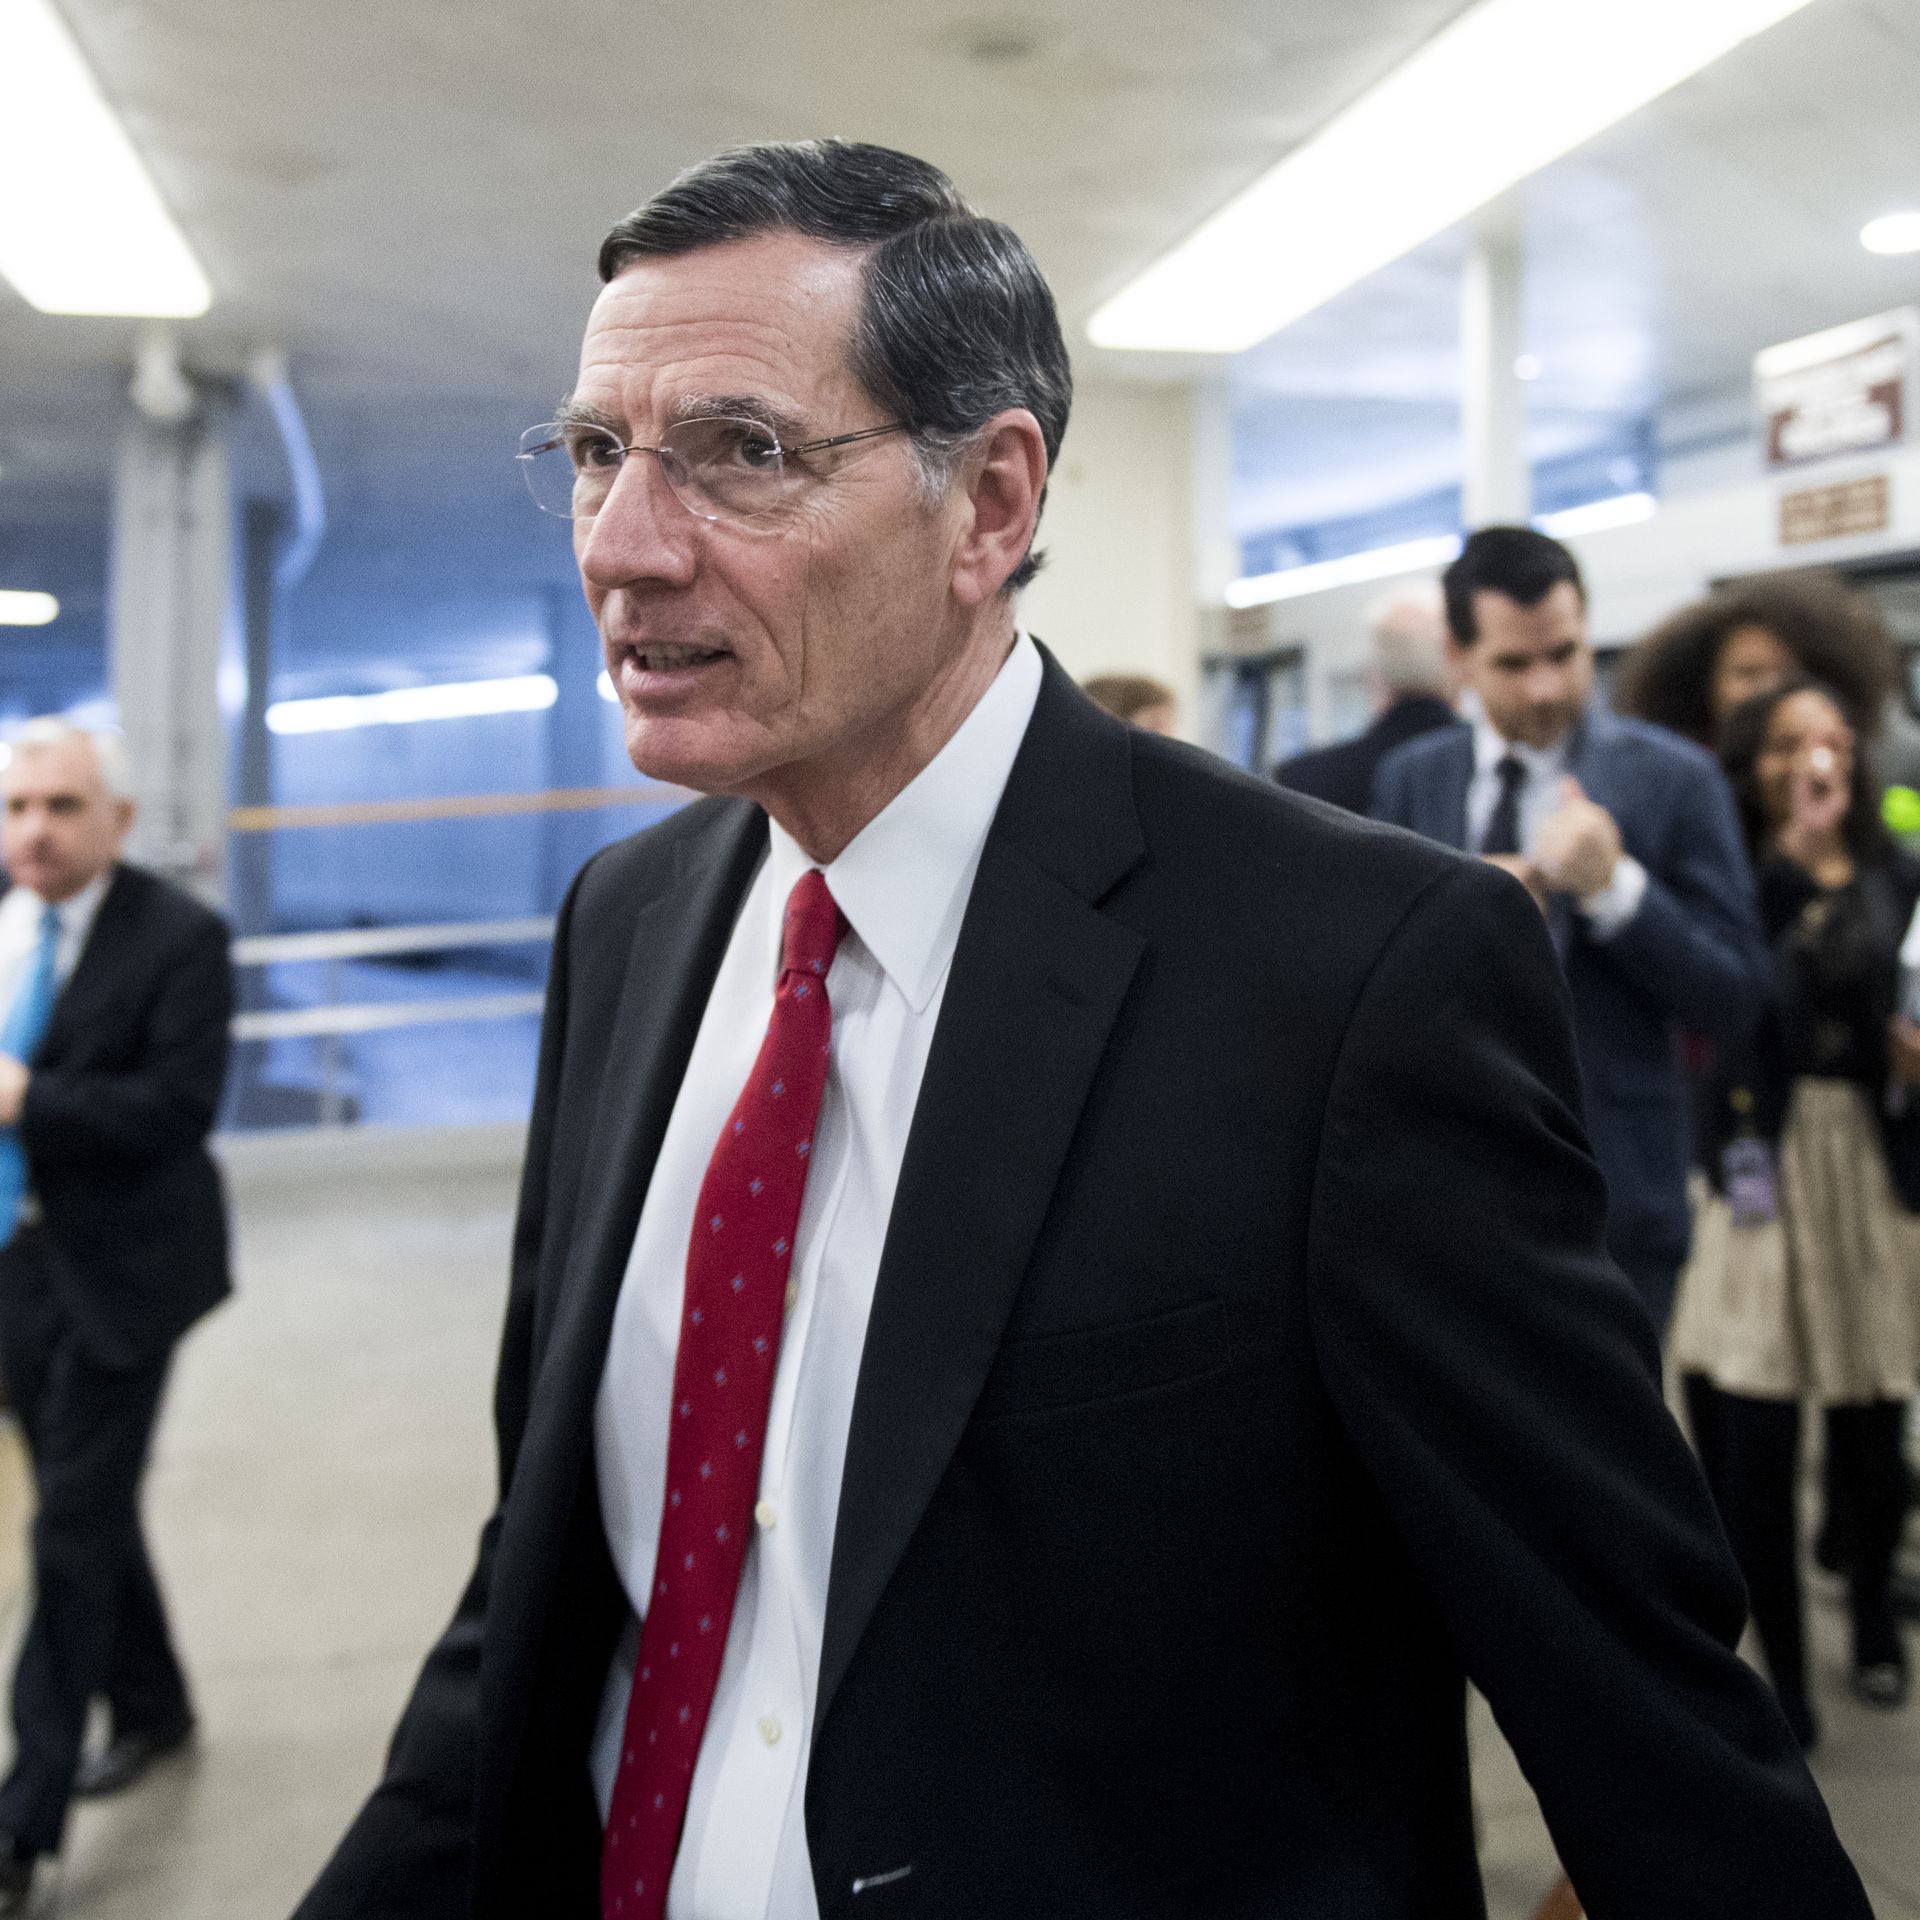 Sen. John Barrasso, R-Wyo., arrives in the Capitol for the Senate policy luncheons on Tuesday, Feb. 26, 2019.